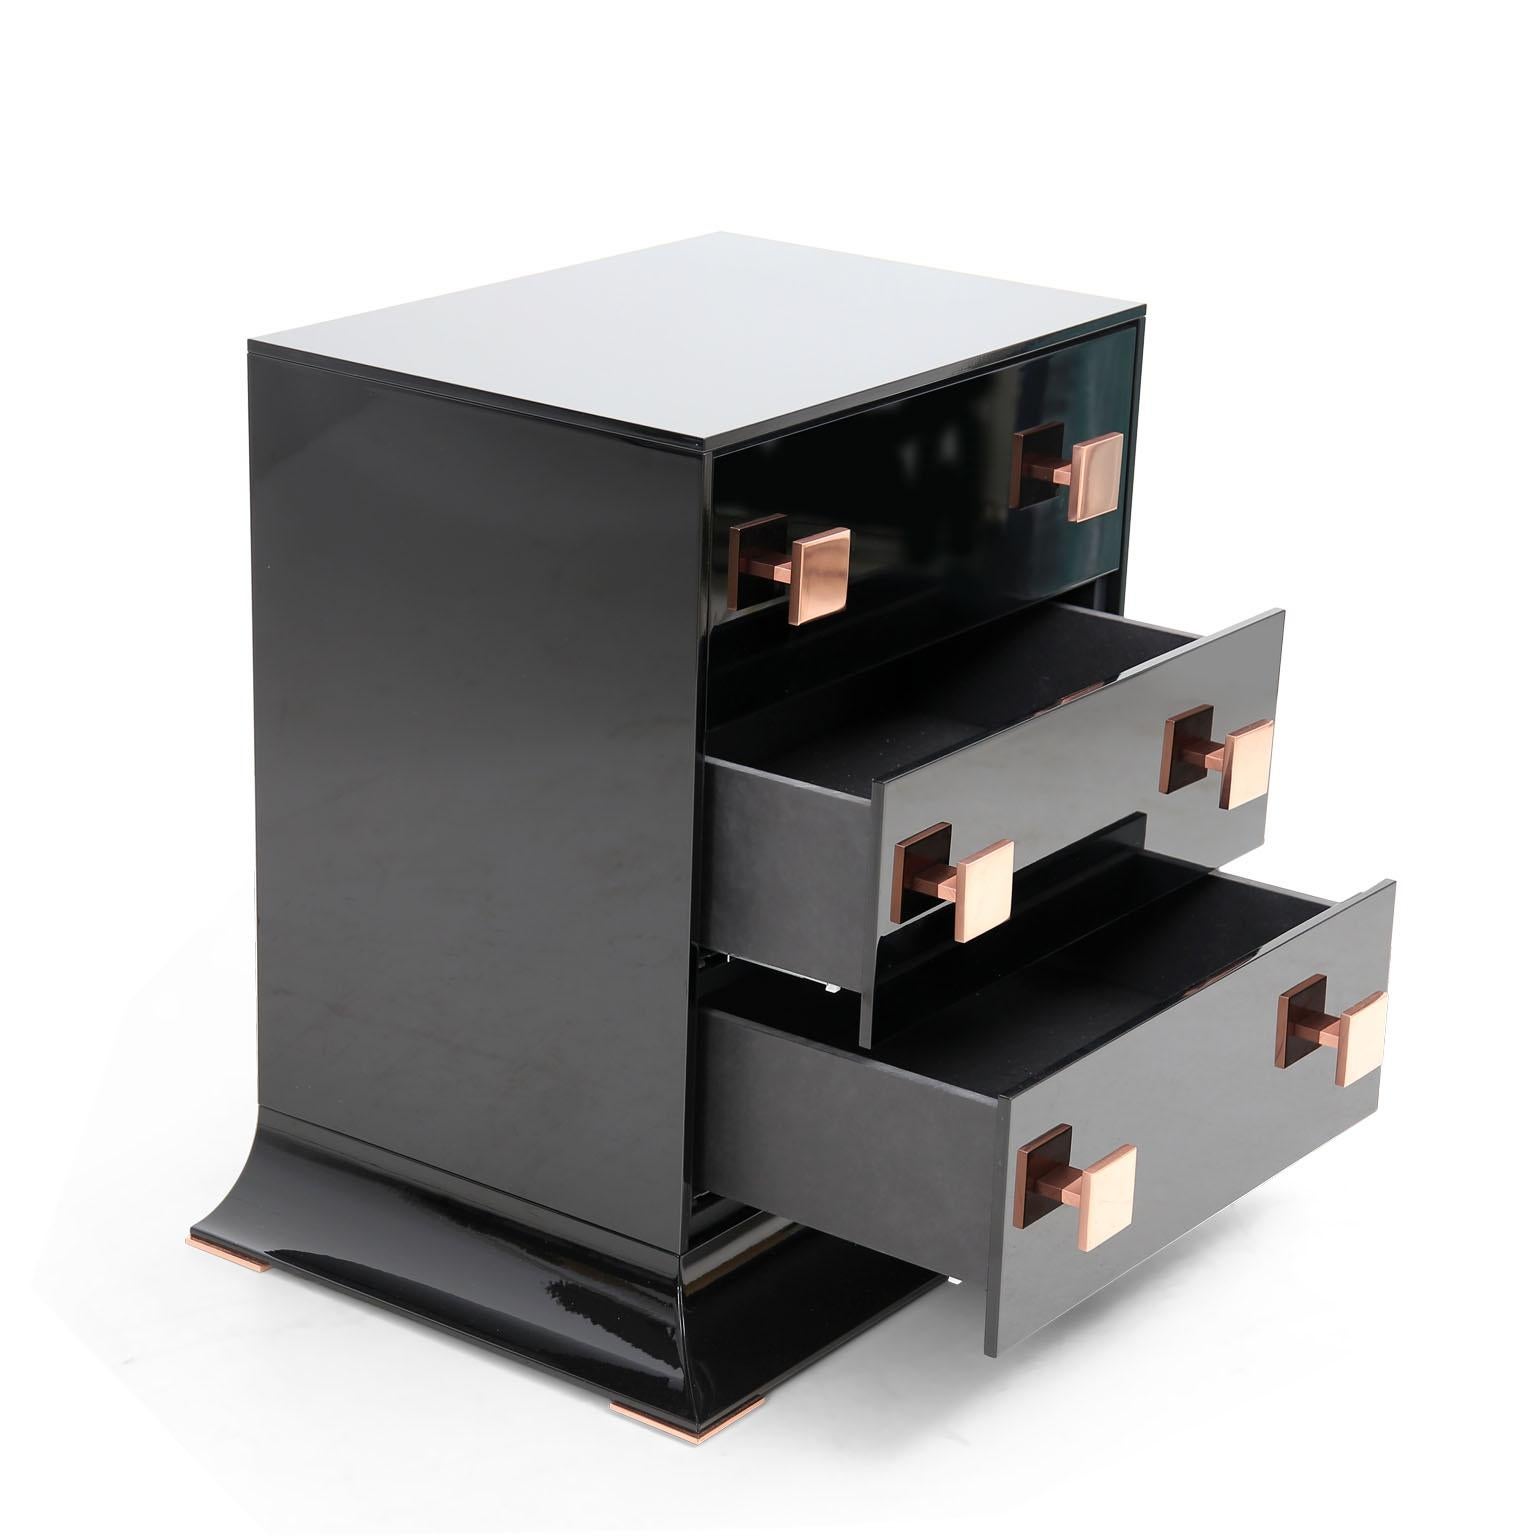 This cabinet is the ultimate in sleek glamour. Simple in silhouette but rich in allure and appeal, the side table Polaris offers a delectable finishing touch to the high-fashion home.

Elevate the humble chest from simply a means of storage to a